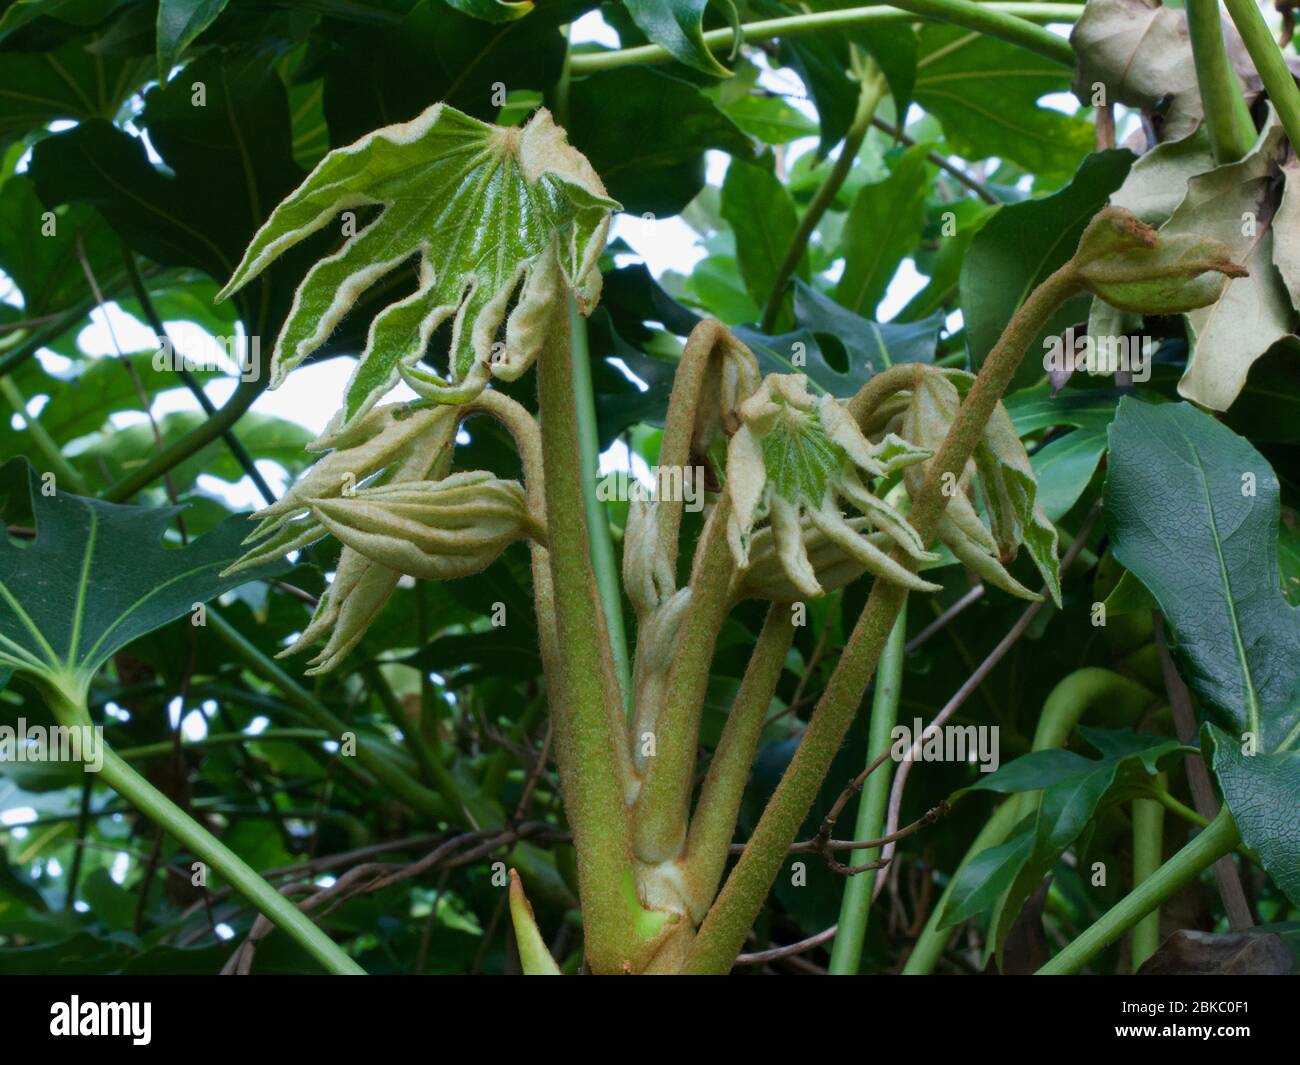 New fatsia leaves - interesting hand-like shapes growing on plant in spring Stock Photo